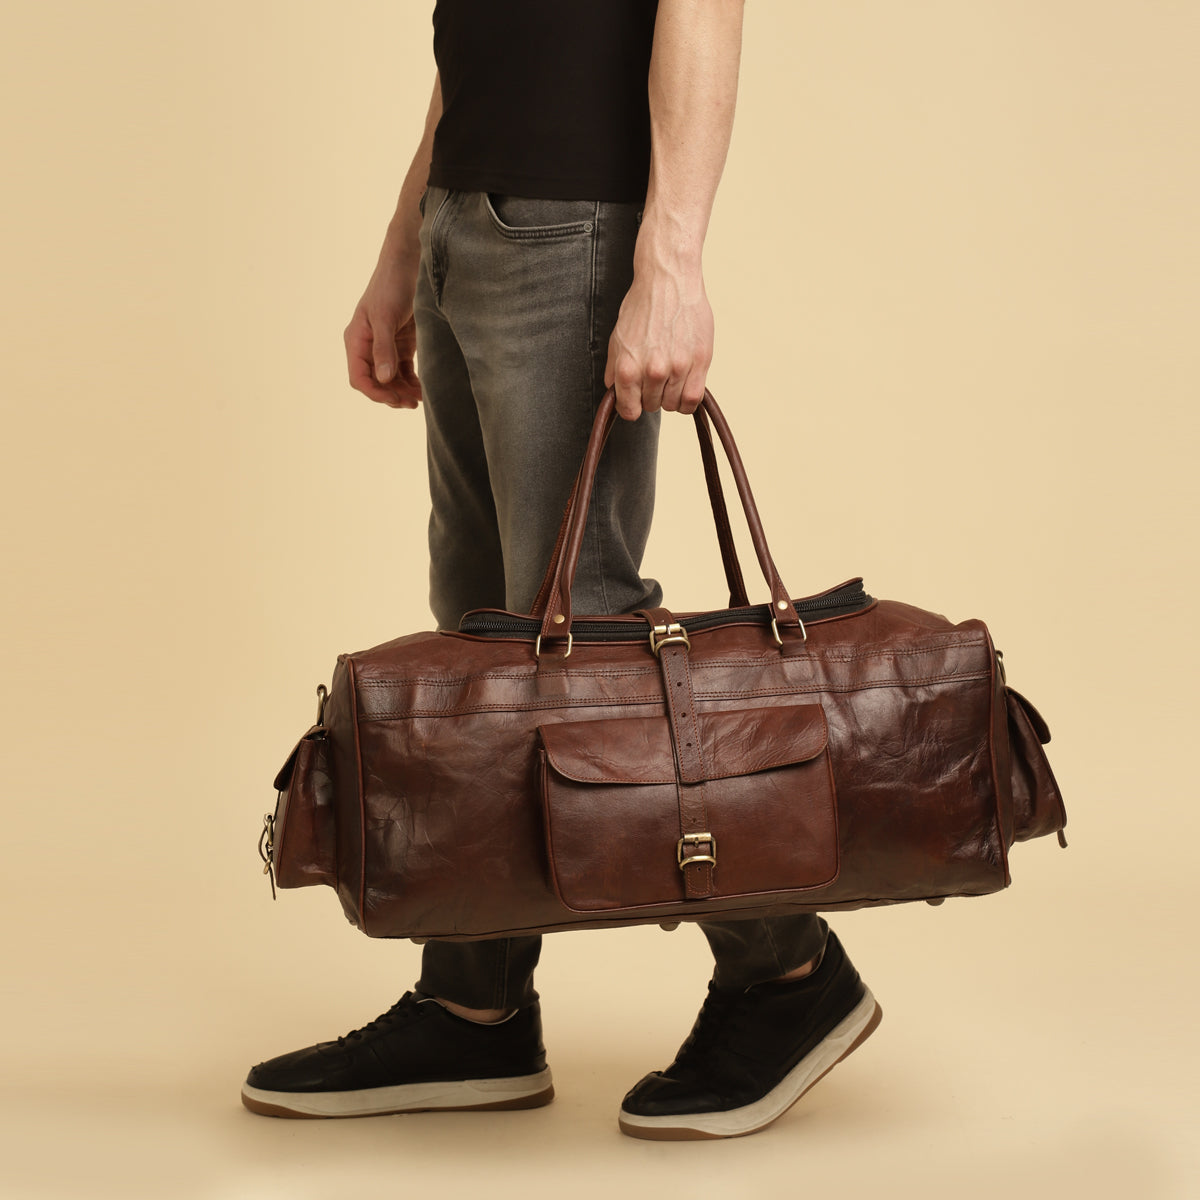 Model holding Red leather duffle bag